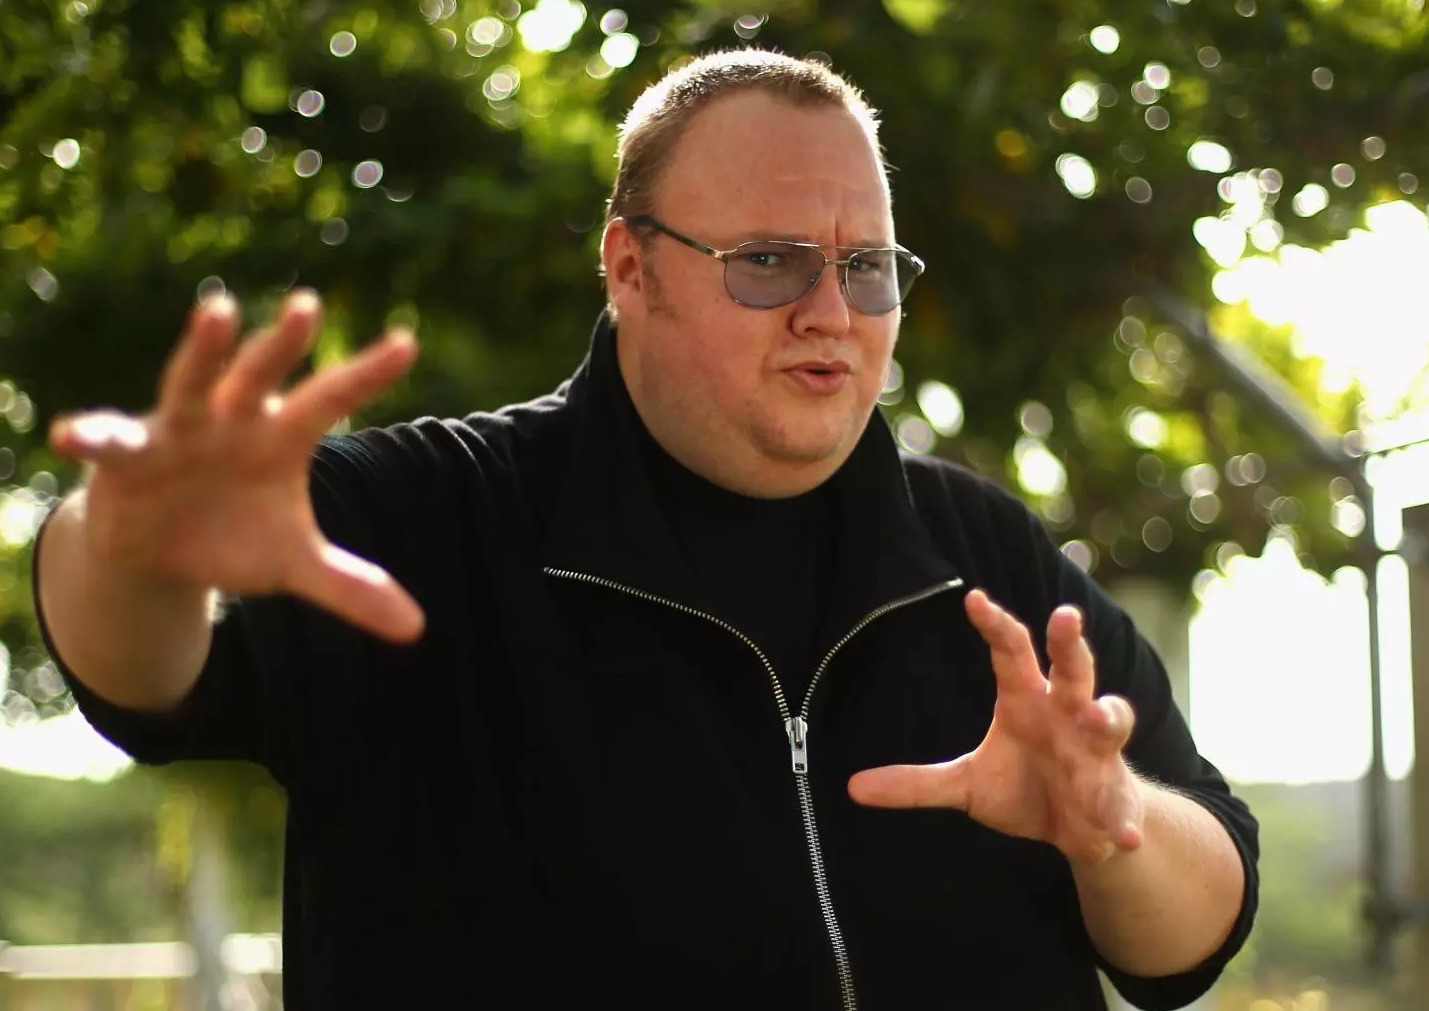 Internet mogul Kim Dotcom loses appeal to avoid extradition to the US